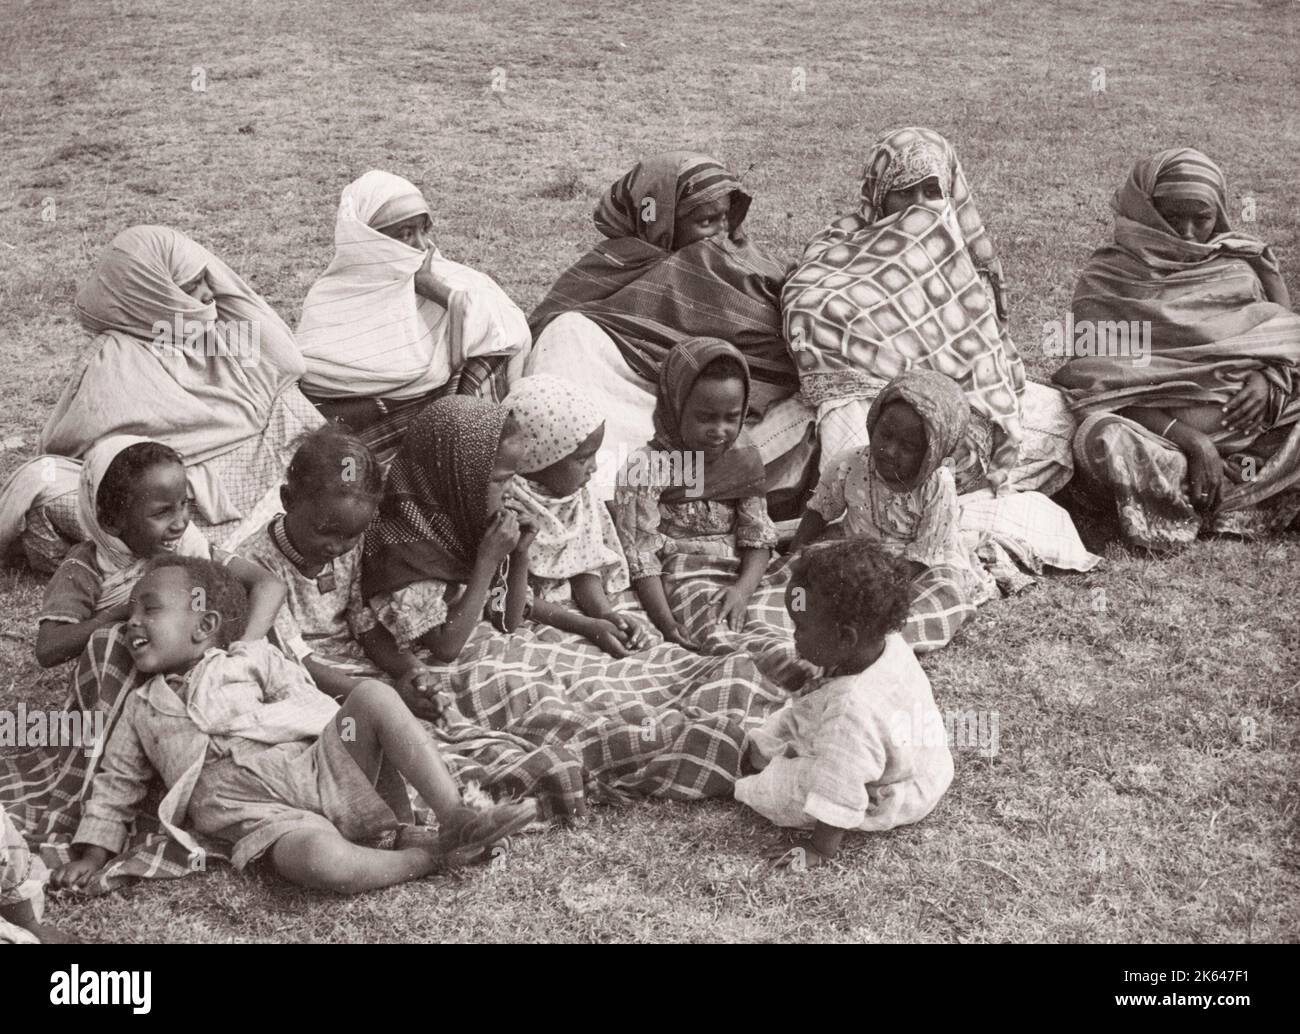 1940s East Africa - Somali women and children, itinerant traders, Kenya Photograph by a British army recruitment officer stationed in East Africa and the Middle East during World War II Stock Photo